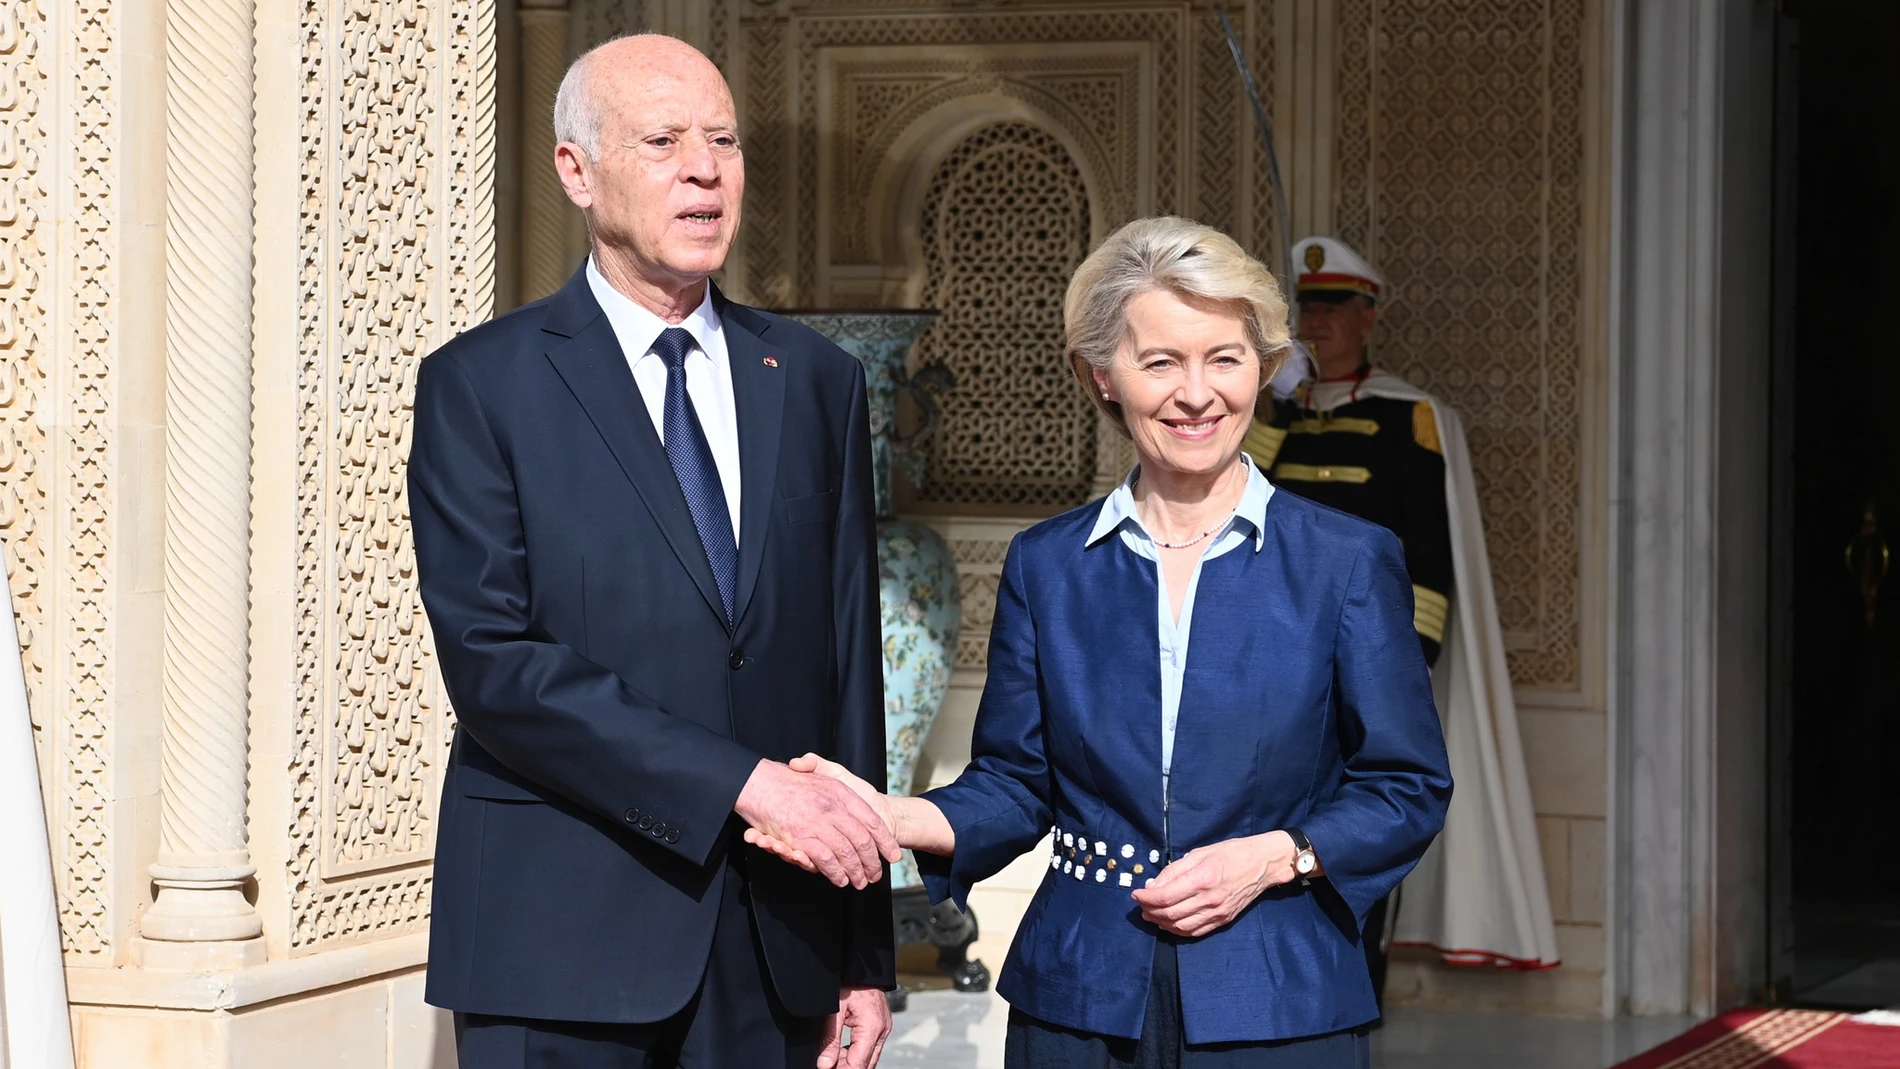 July 16, 2023, Tunis, Tunis, Tunisia: Tunisian President Kais Saied meets with, Prime Minister of Italy Giorgia Meloni , President of European Commission Ursula von der Leyen, Prime Minister of the Netherlands Mark Rutte at the Presidential Palace in Tunis, Tunisia on July 16, 2023. At the press conference, it was announced that a comprehensive cooperation memorandum of understanding was signed between Tunisia and the EU (Foto de ARCHIVO) 16/07/2023